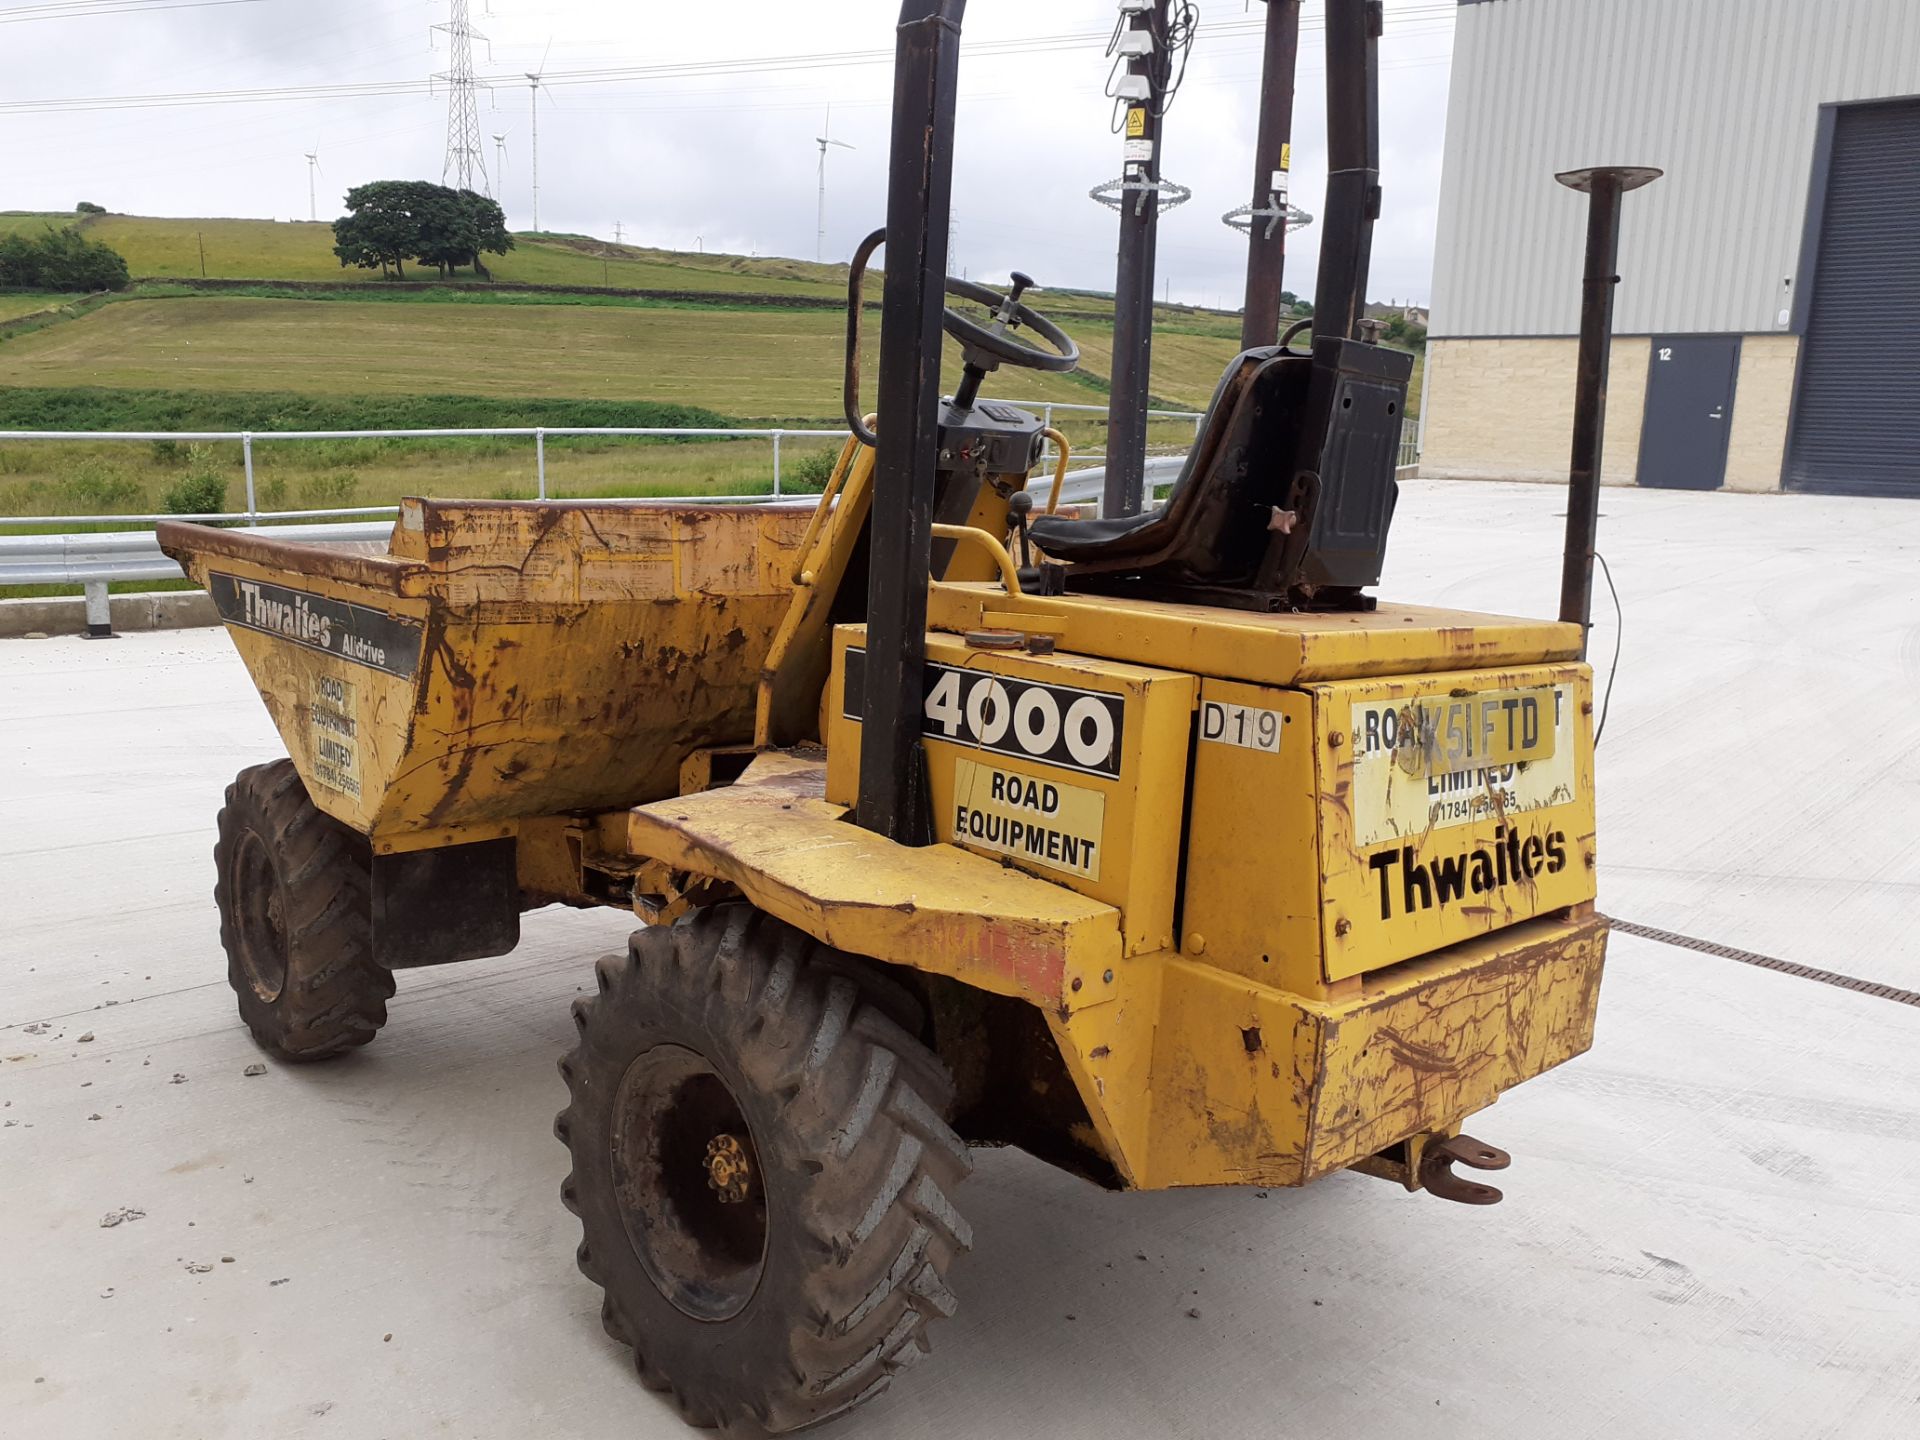 THWAITES 2 TONNE DUMPER, STARTS DRIVES TIPS, CHASSIS PLATE SHOWS 1998, WAS ROAD REGISTERED IN 2001 - Image 4 of 5